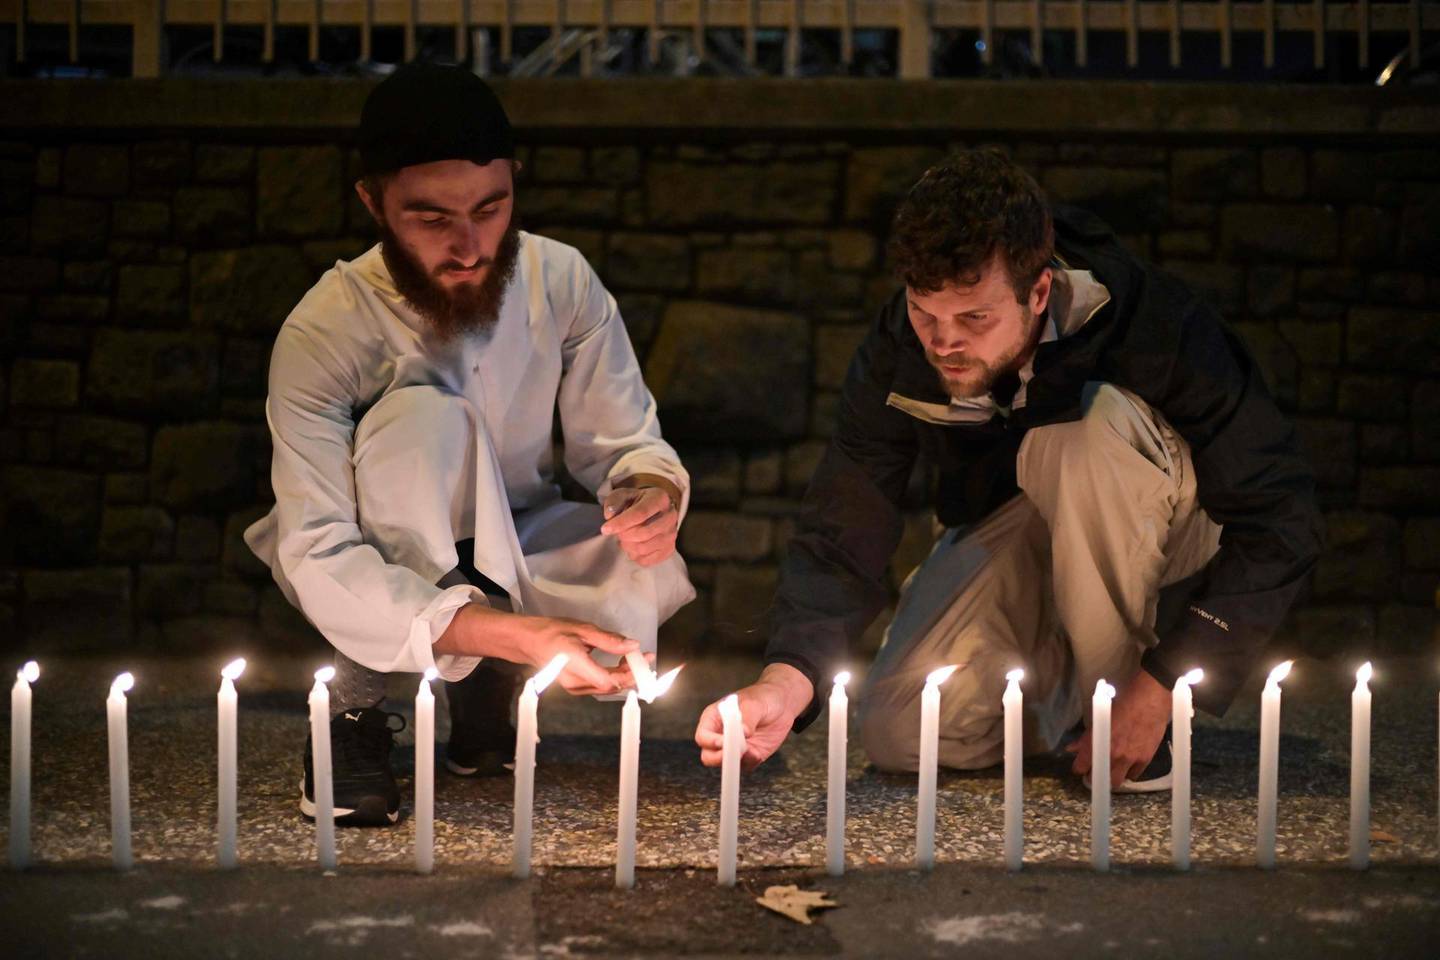 Well-wishers light 49 candles as they pay respects to victims outside the hospital in Christchurch on March 16, 2019, after a shooting incident at two mosques in the city the previous day. A right-wing extremist who filmed himself rampaging through two mosques in the quiet New Zealand city of Christchurch killing 49 worshippers appeared in court on a murder charge on March 16. / AFP / Anthony WALLACE
